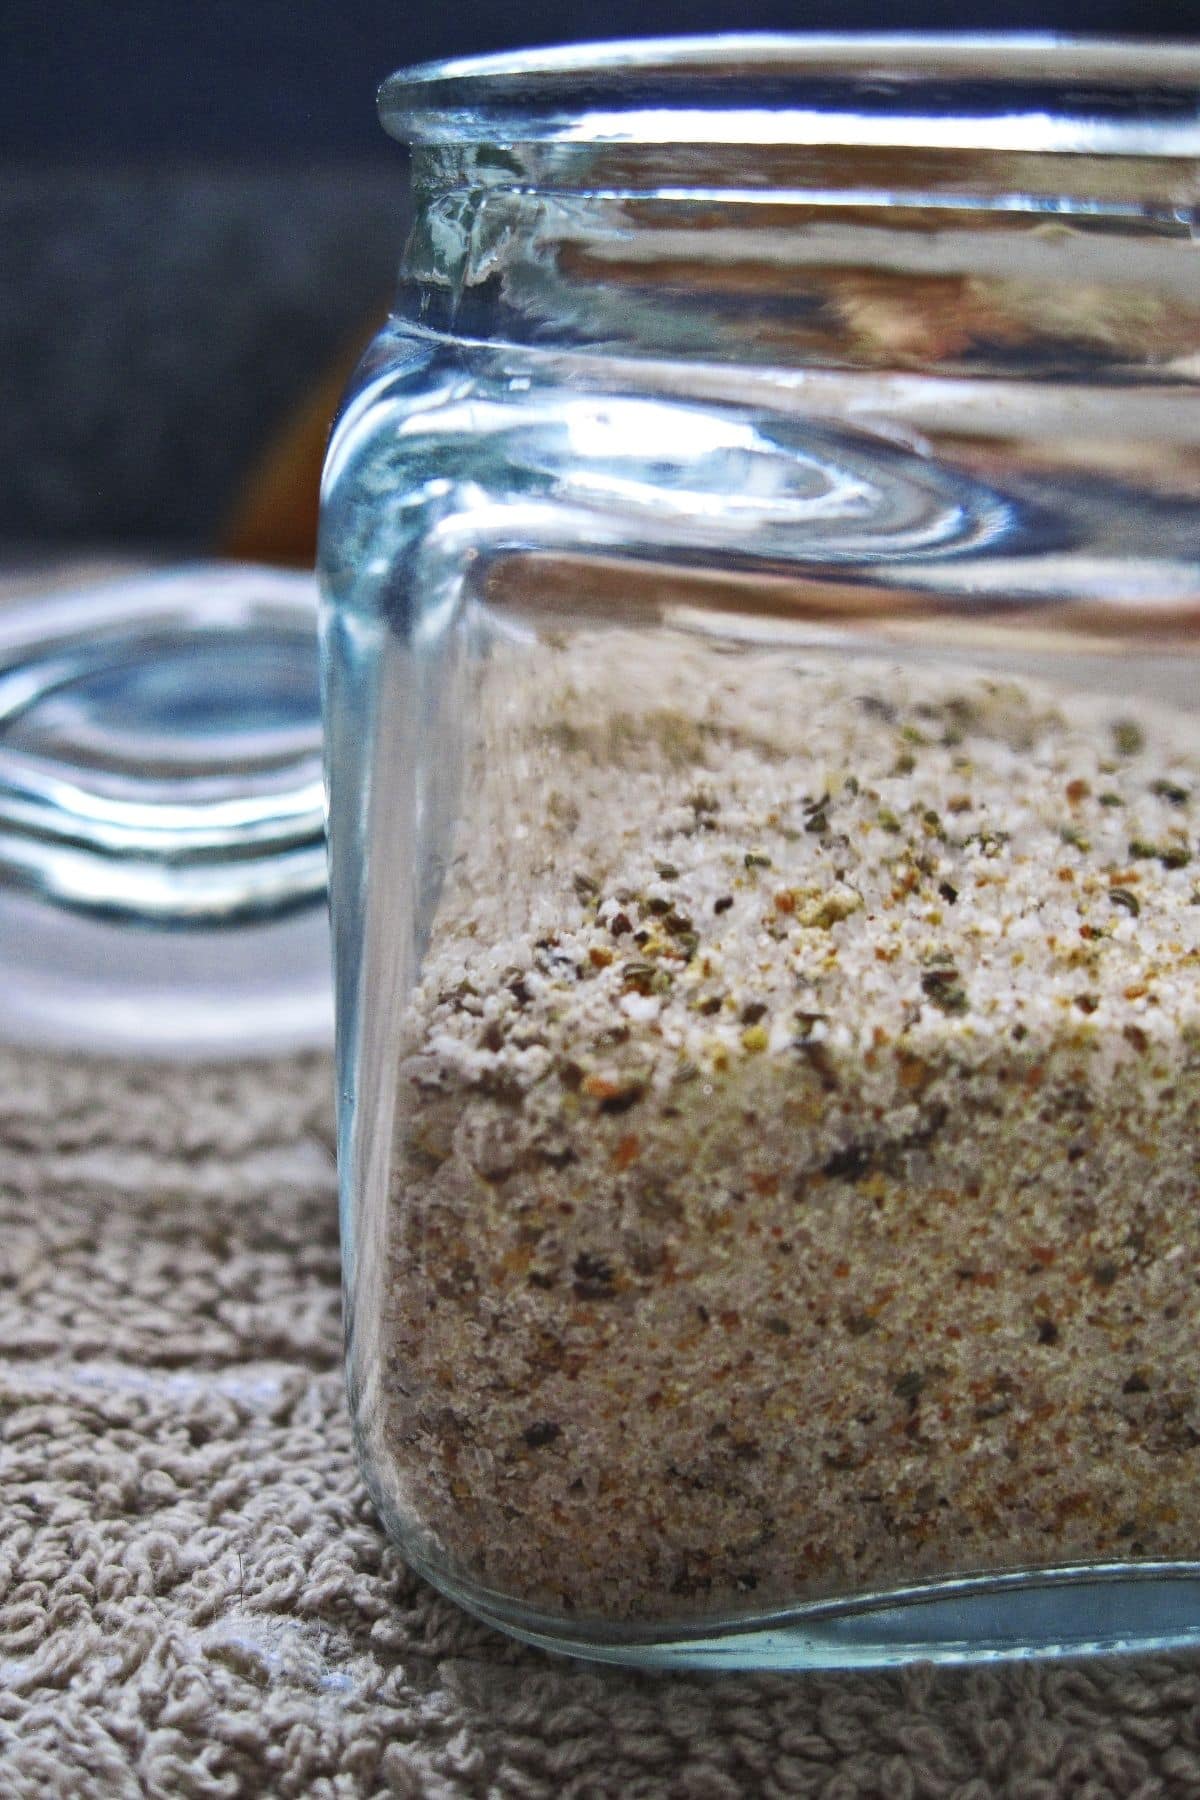 Clear glass container of Seasoning salt.